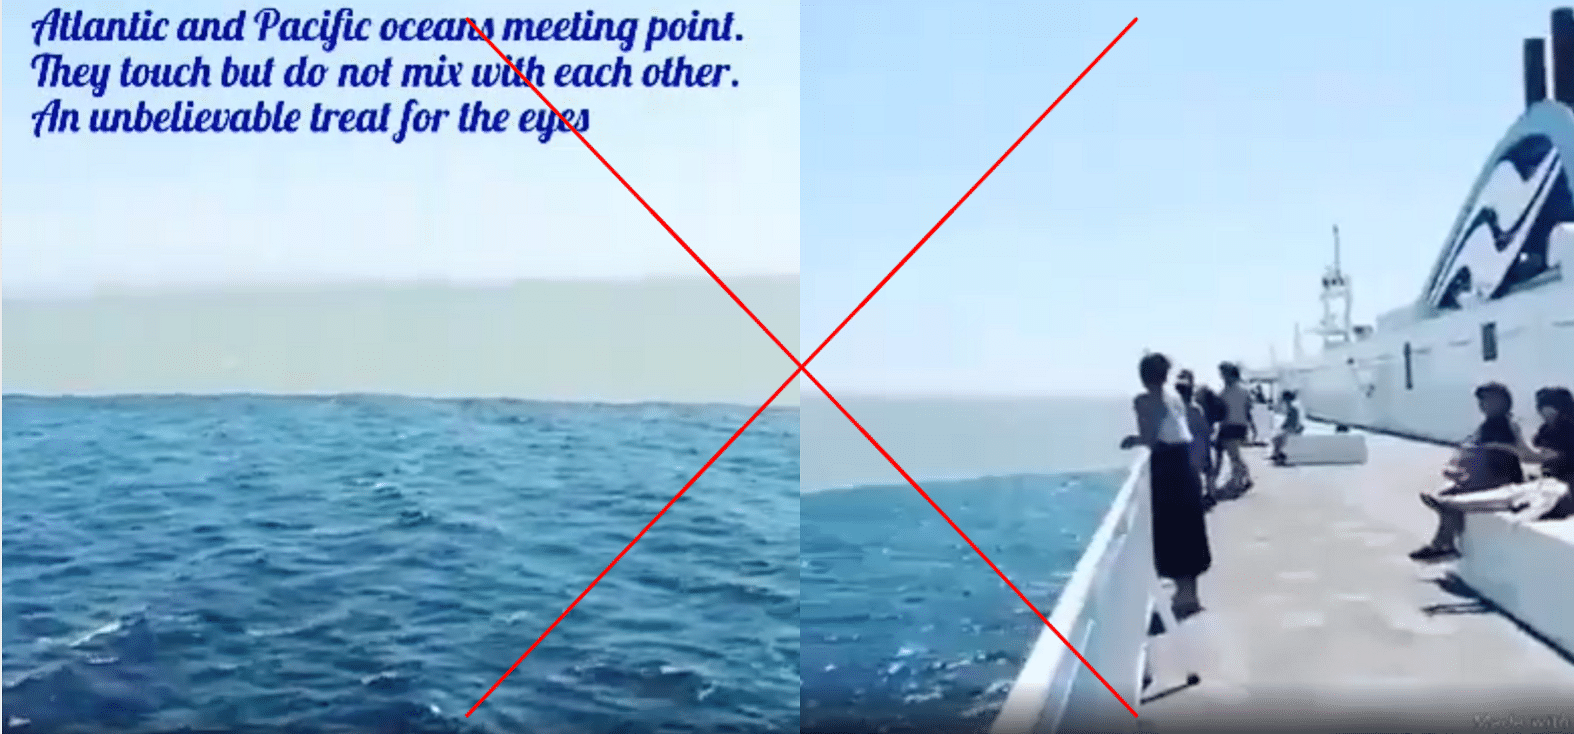 Fact Check of Video of Meeting Point of Atlantic and Pacific Oceans: No